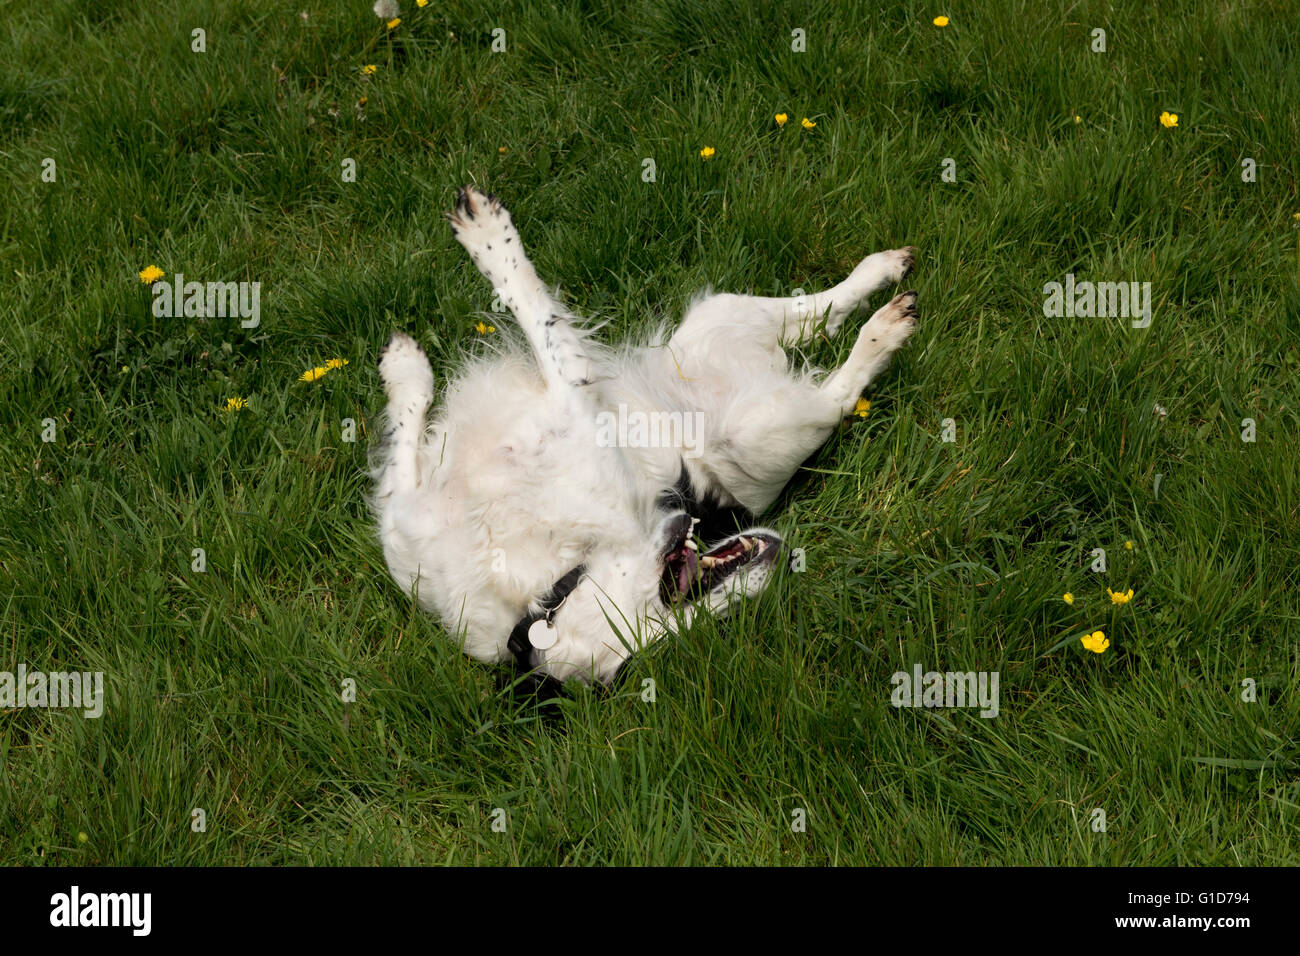 A cocker spaniel dog rolling on something smelly in the grass Stock Photo